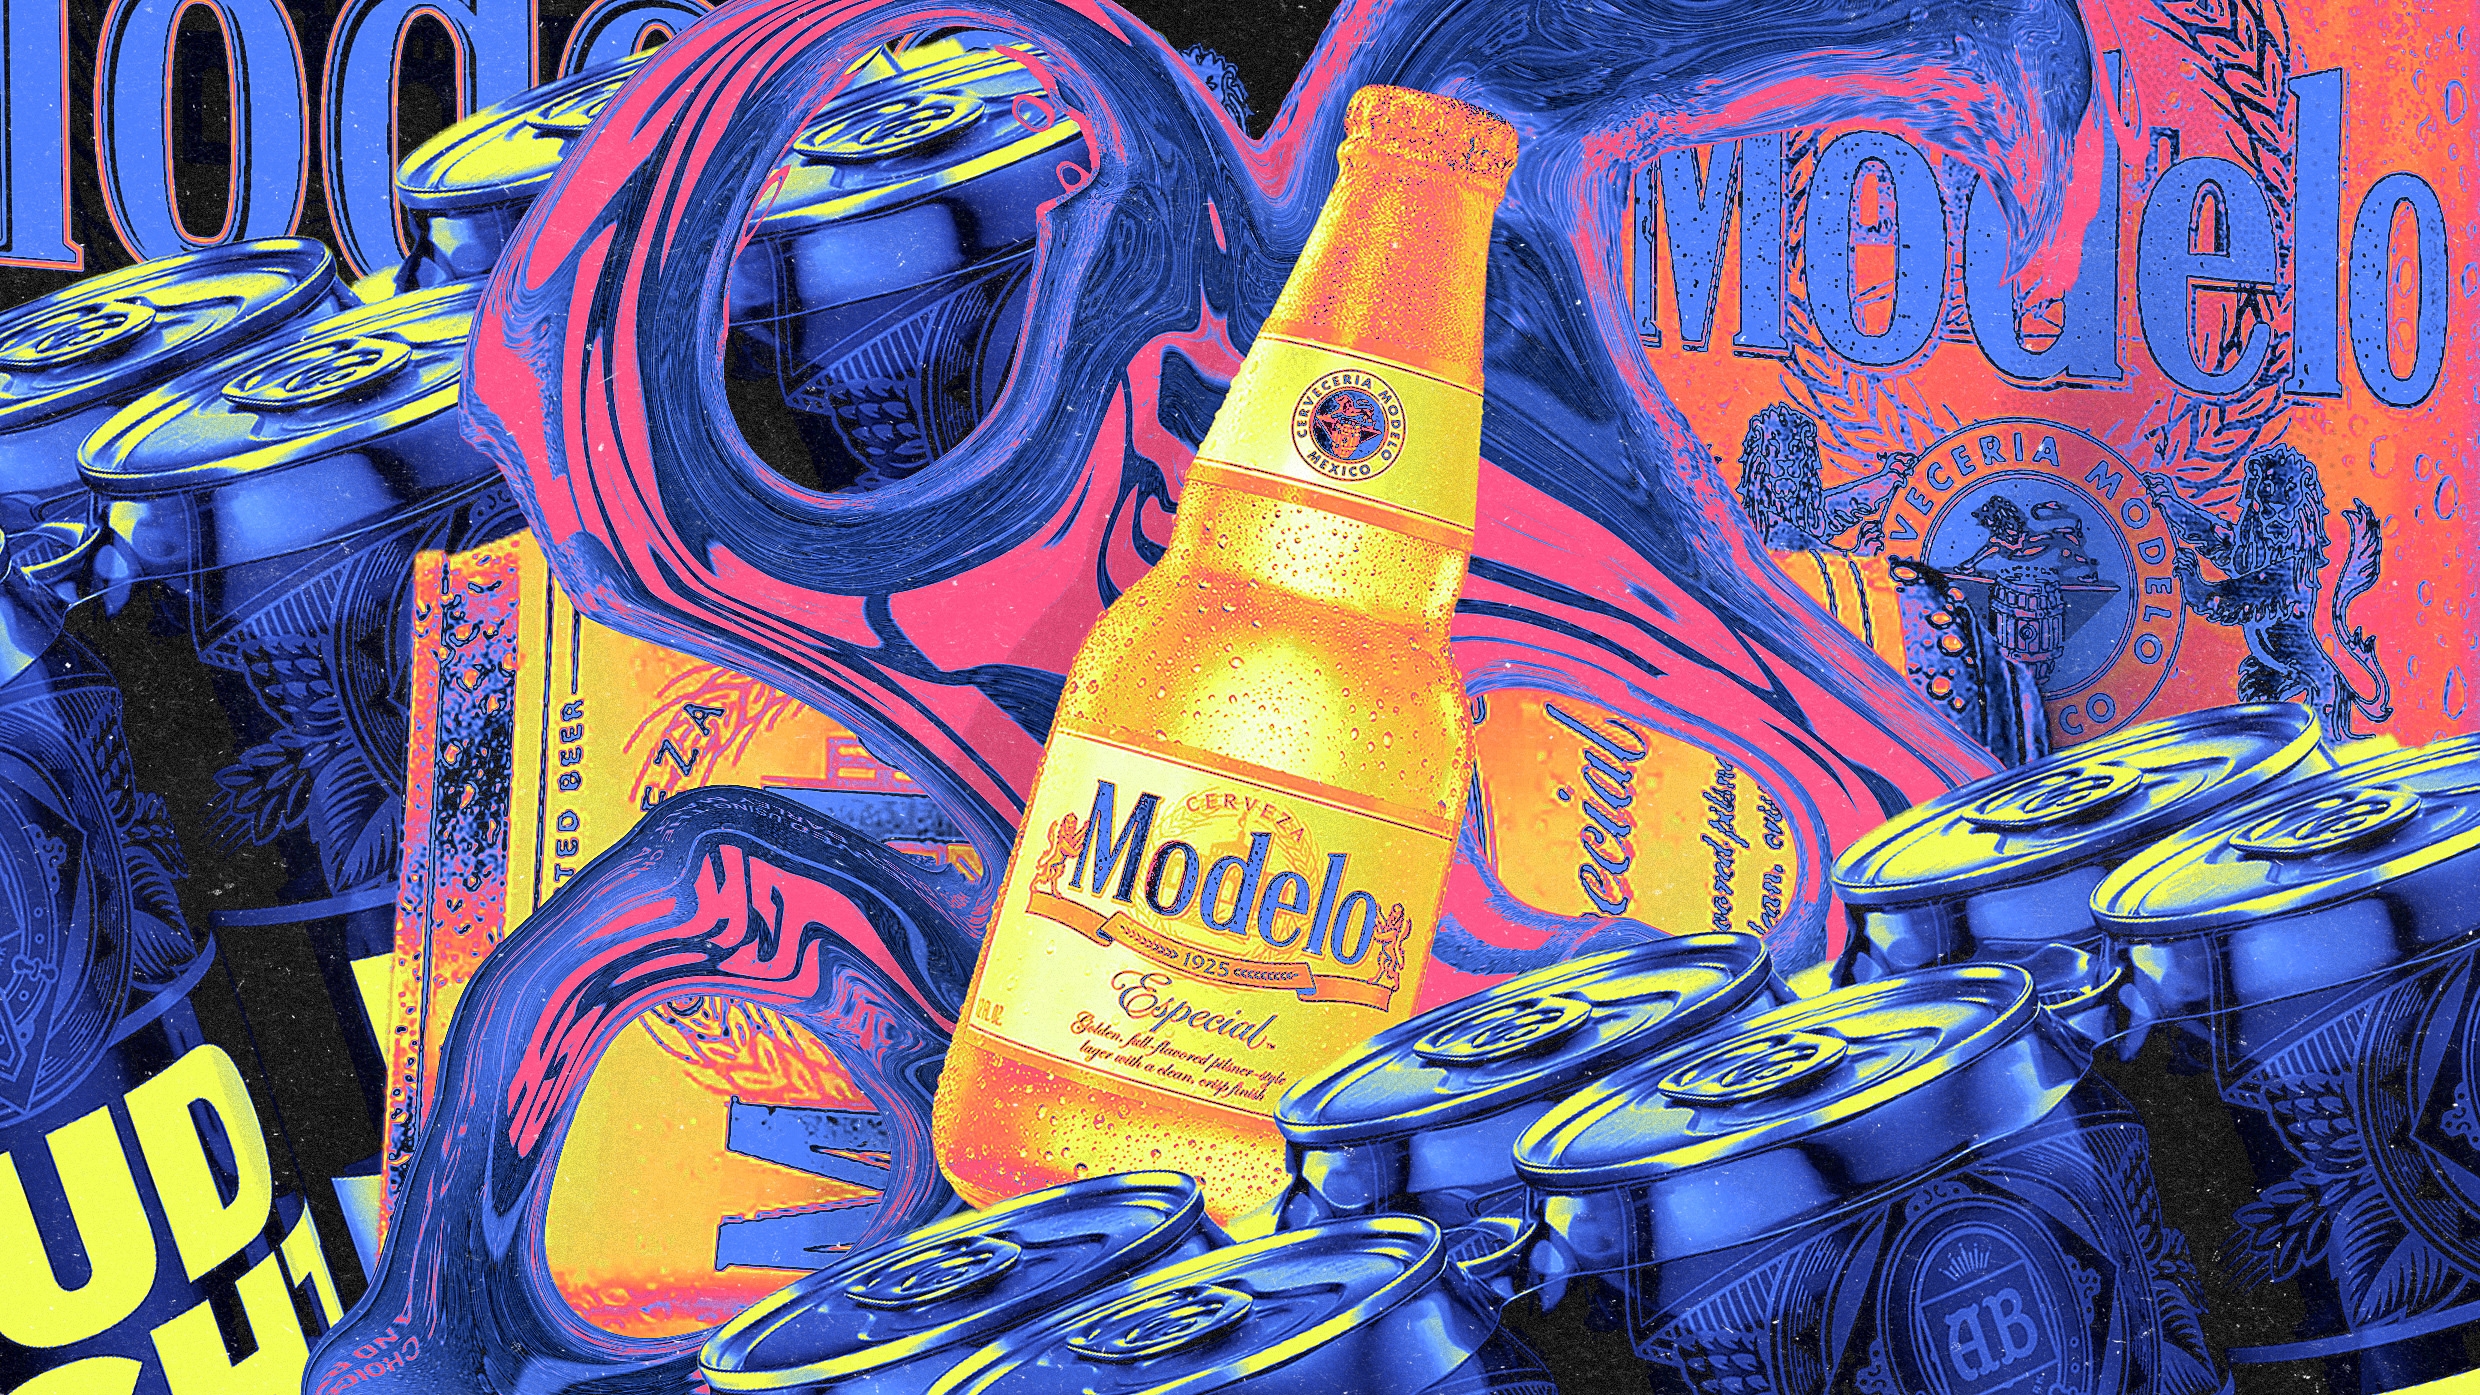 How Modelo Especial quietly became America’s top beer brand